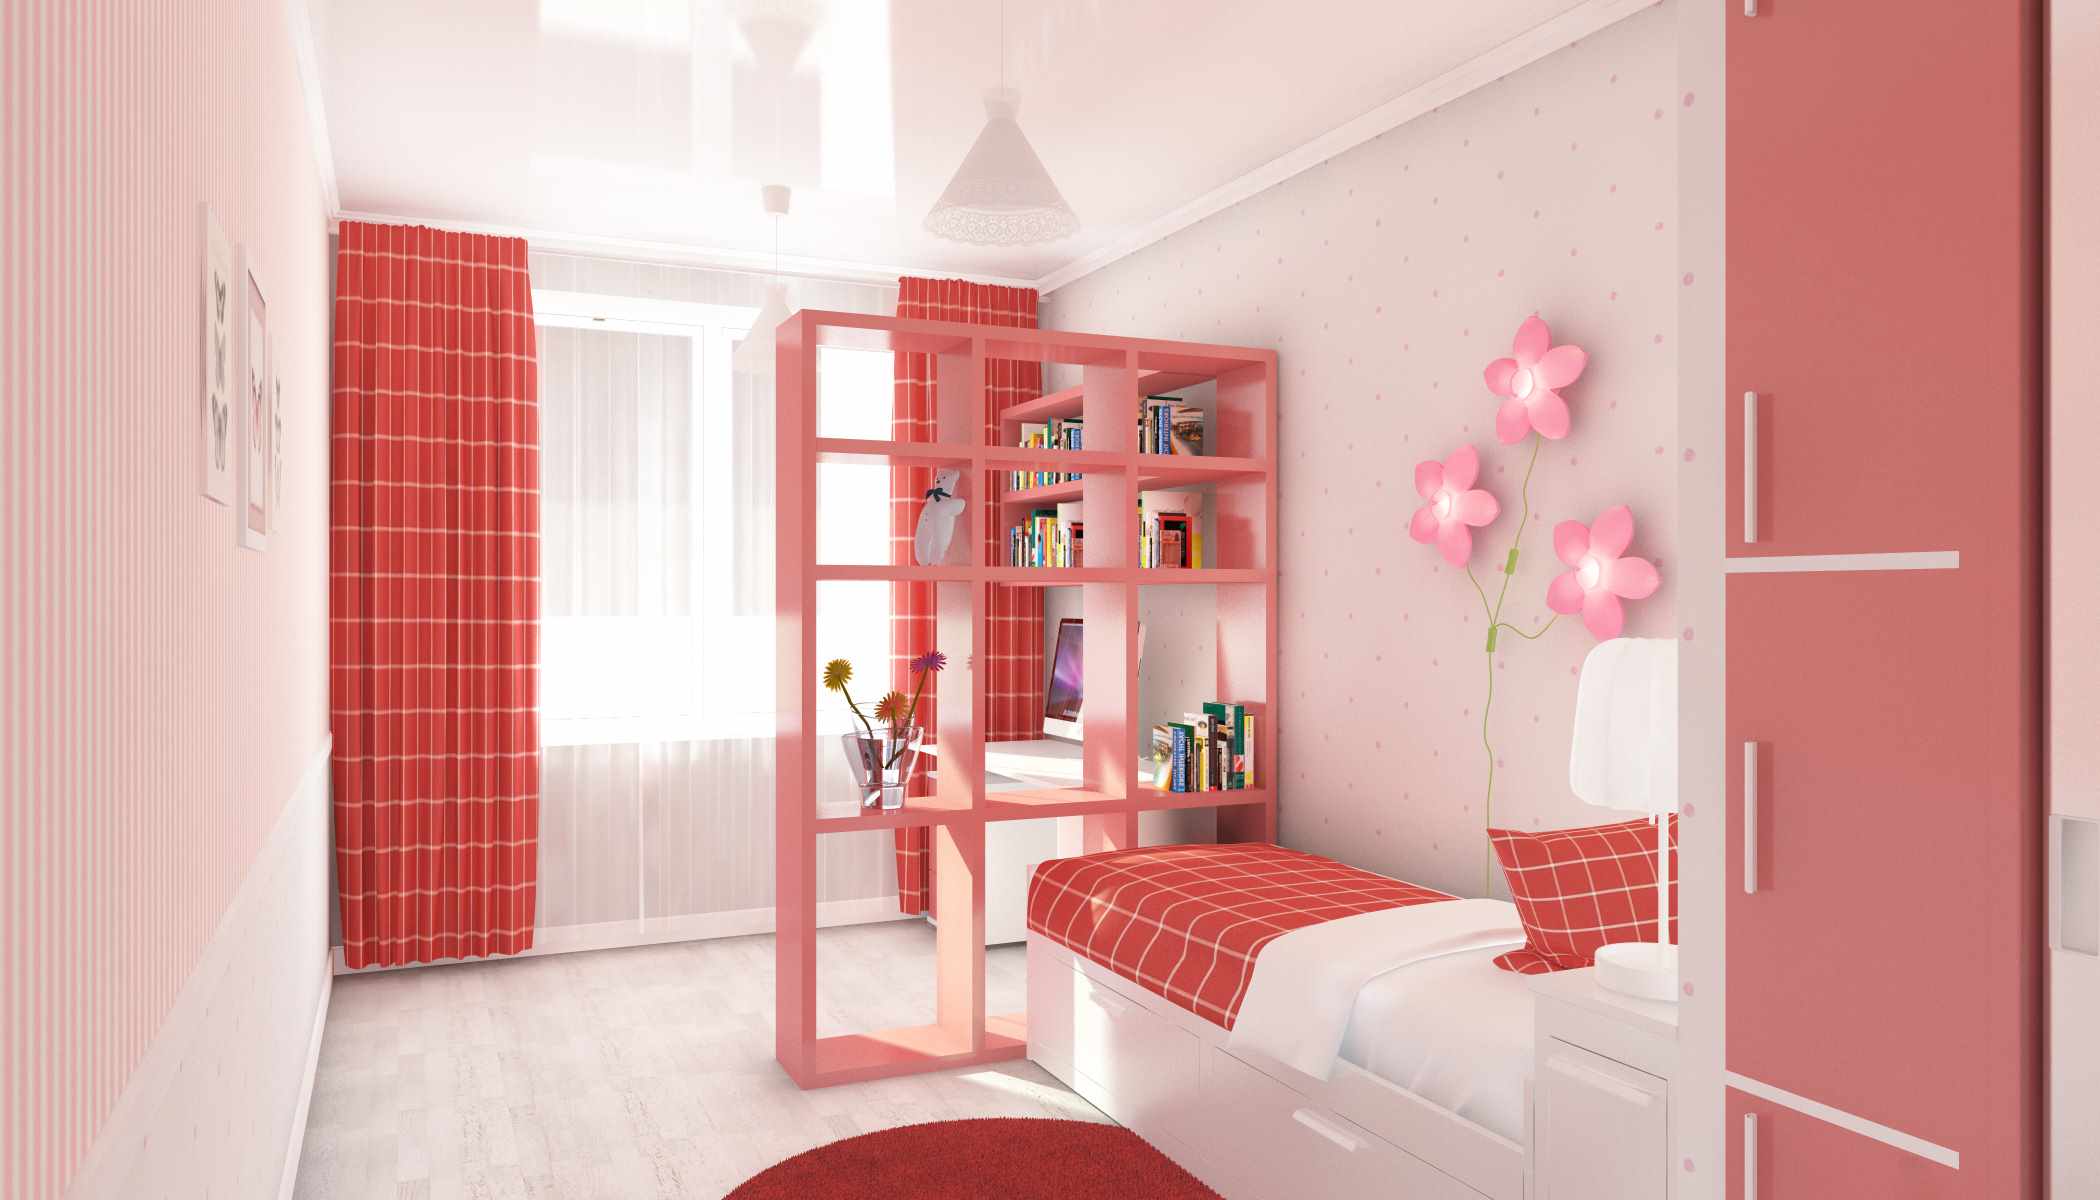 an example of an unusual style of a nursery for a girl